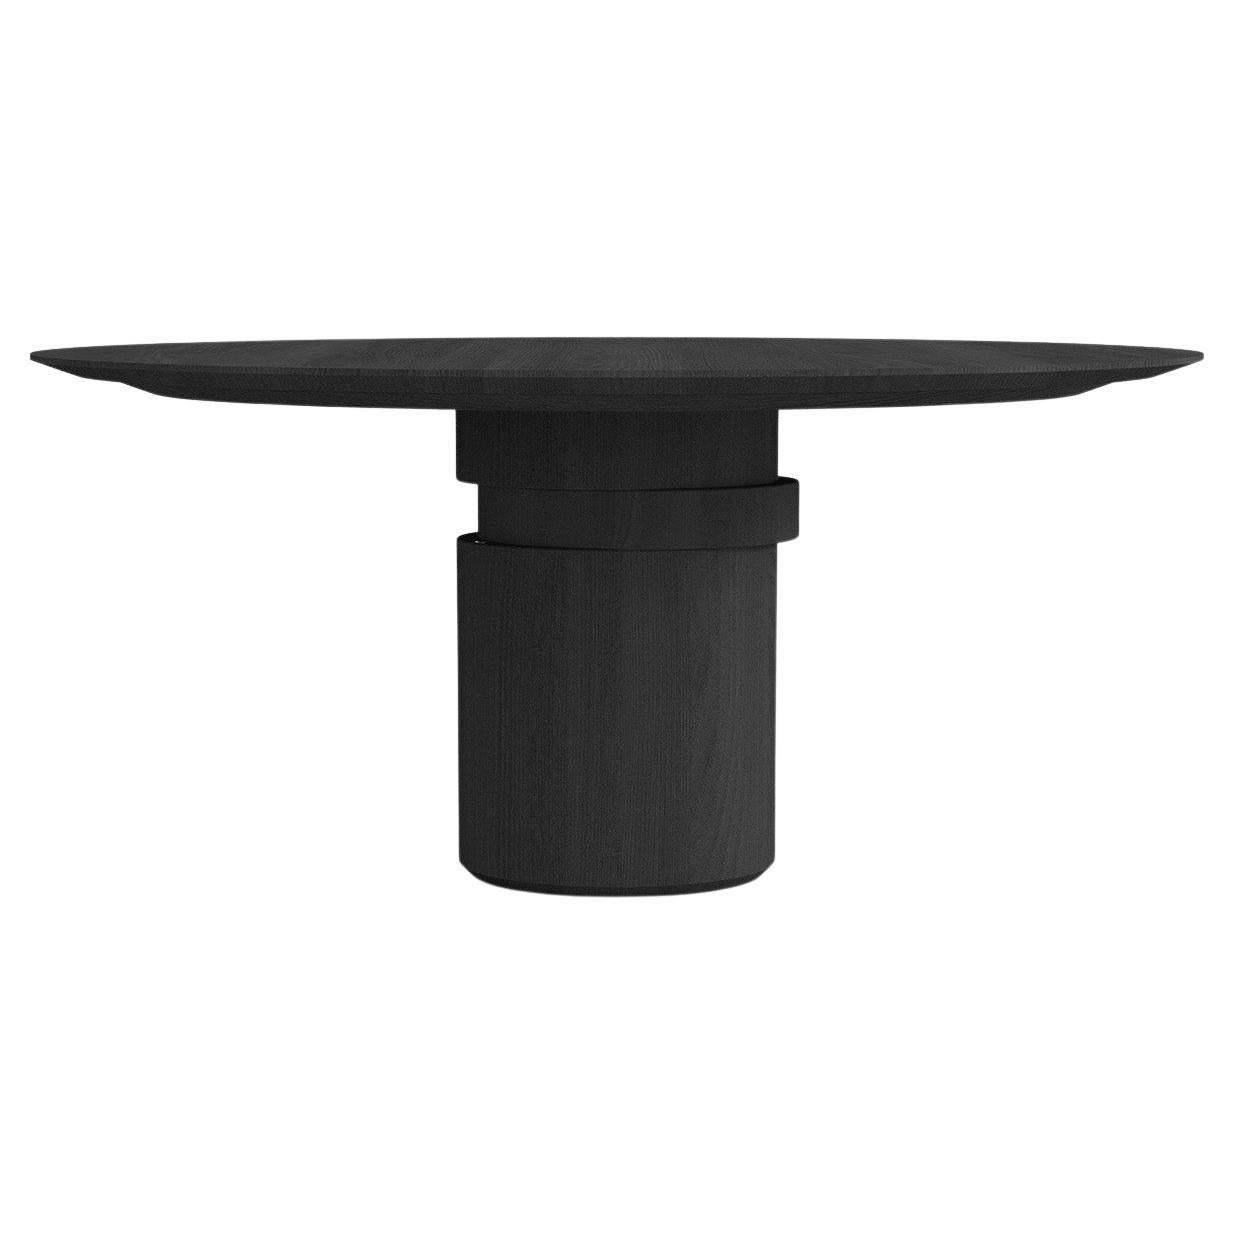 contemporary black ash wood dining table M, disc table by barh.design 